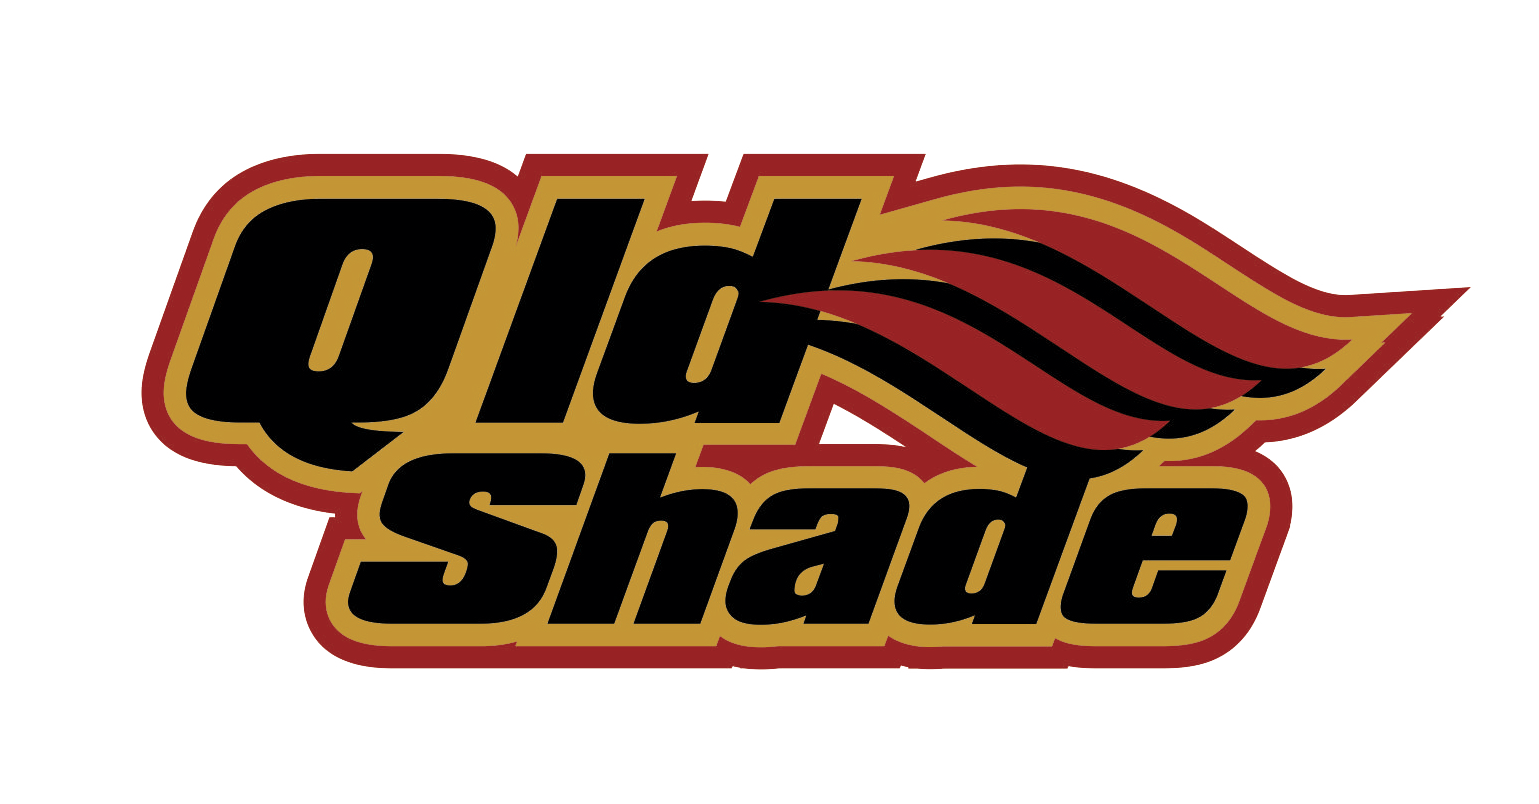 A logo featuring the text "Qld Shade" in bold black and red font with stylized red and yellow waves extending from the letter "d".